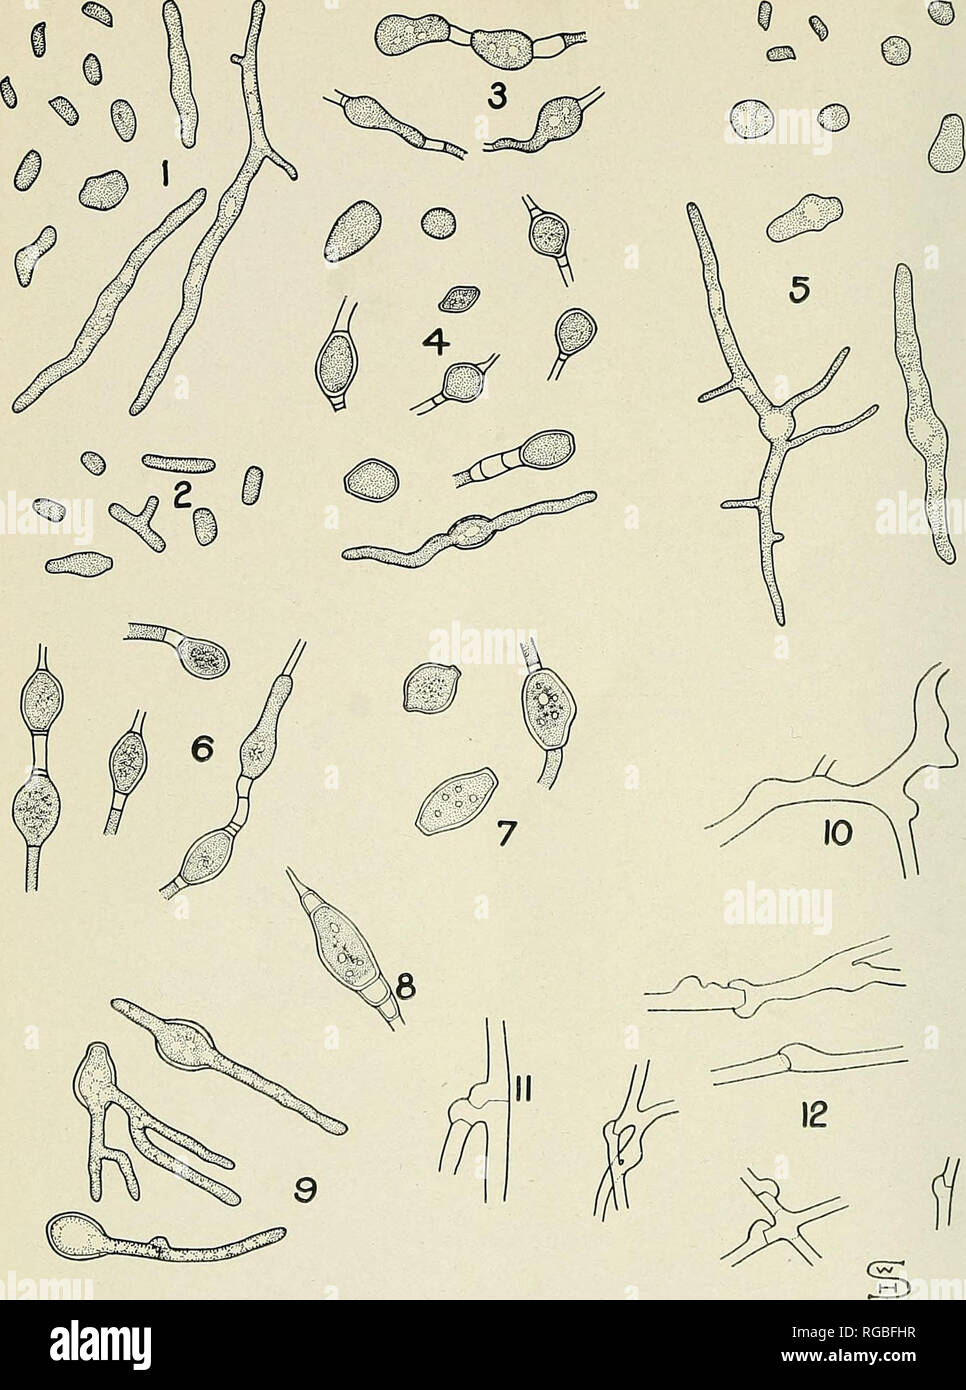 . Bulletin of the U.S. Department of Agriculture. Agriculture; Agriculture. Bui. 1053, U. S. Dept. of Agriculture. PLATE IV.. Basidiospore Studies of Lenzites and Trametes. (X 475.) Fig. 1.—Germinating basidiospores of Lenzites trabea on malt agar. Fig. 2.—Oidia of Lenzites trabea from secondary aerial mycelium on malt agar. Fig. 3.—Stages in formation of chlamydospores upon submerged mycelium of Lenzites trabea in malt agar. Fig. 4.—Chlamy- dospores and chlamydosporelike bodies of Lenzites trabea upon submerged mycelium in malt agar, one of them germinating. Fig. 5.—Germinating basidiospores  Stock Photo